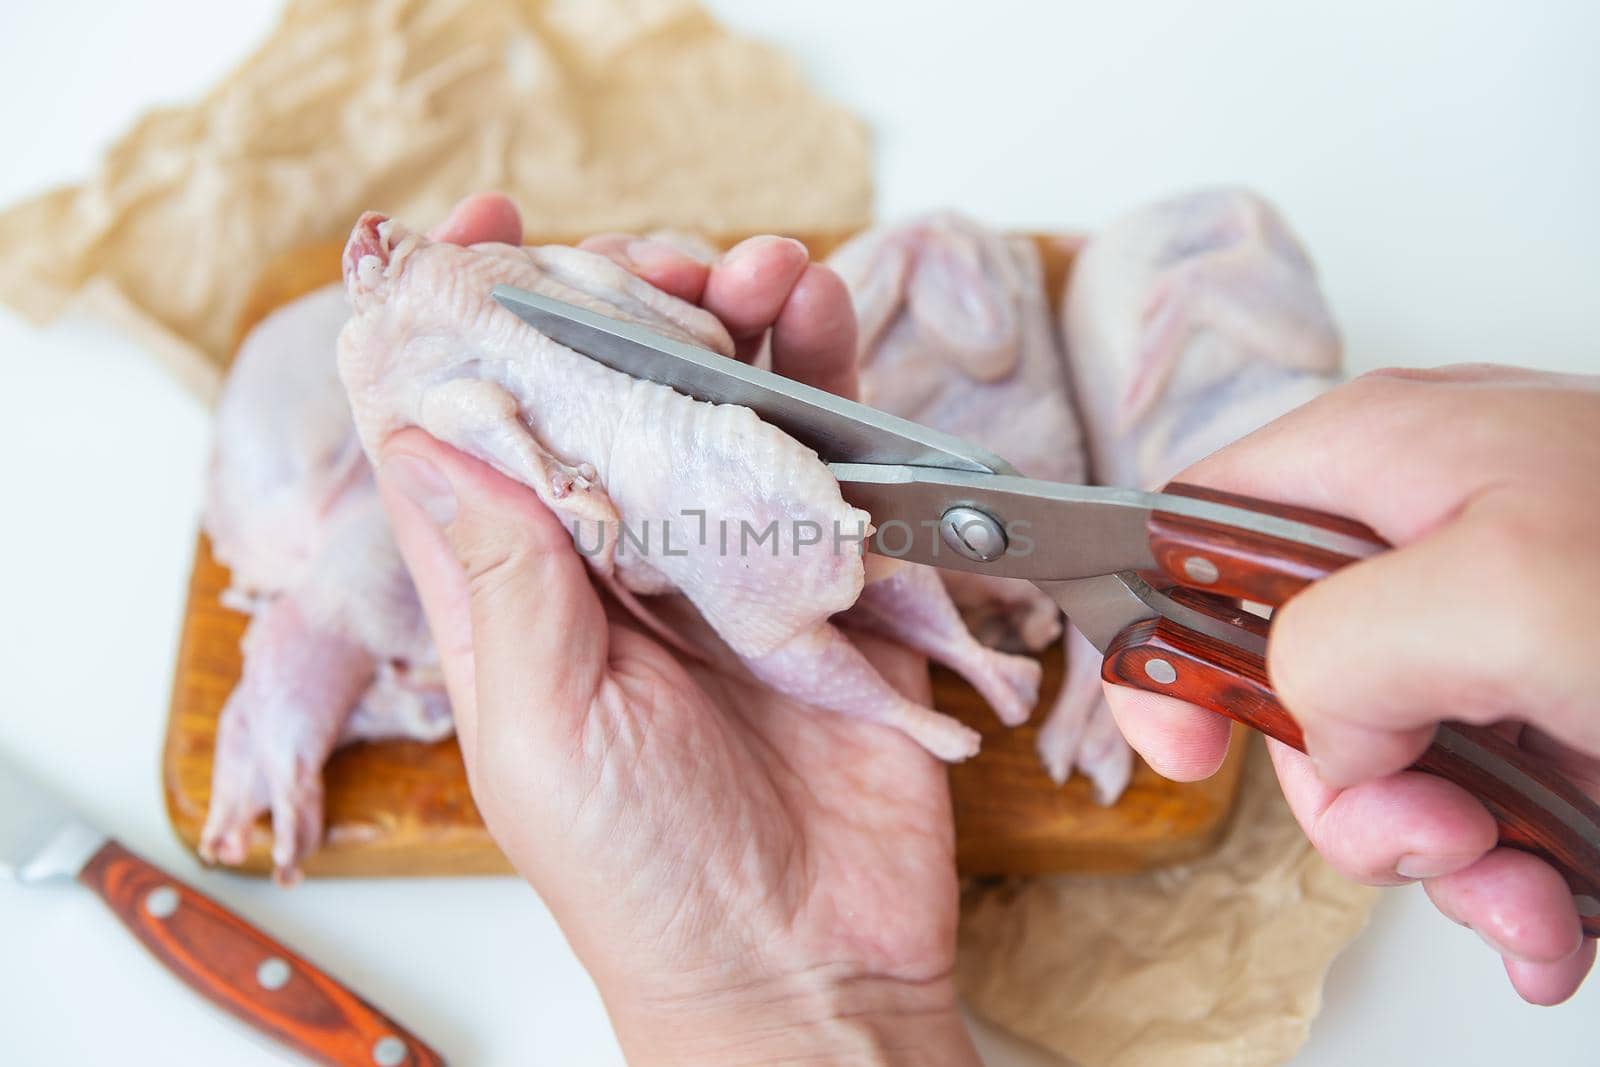 Raw quails lie on a wooden board. A man uses scissors to cut diet lean meat